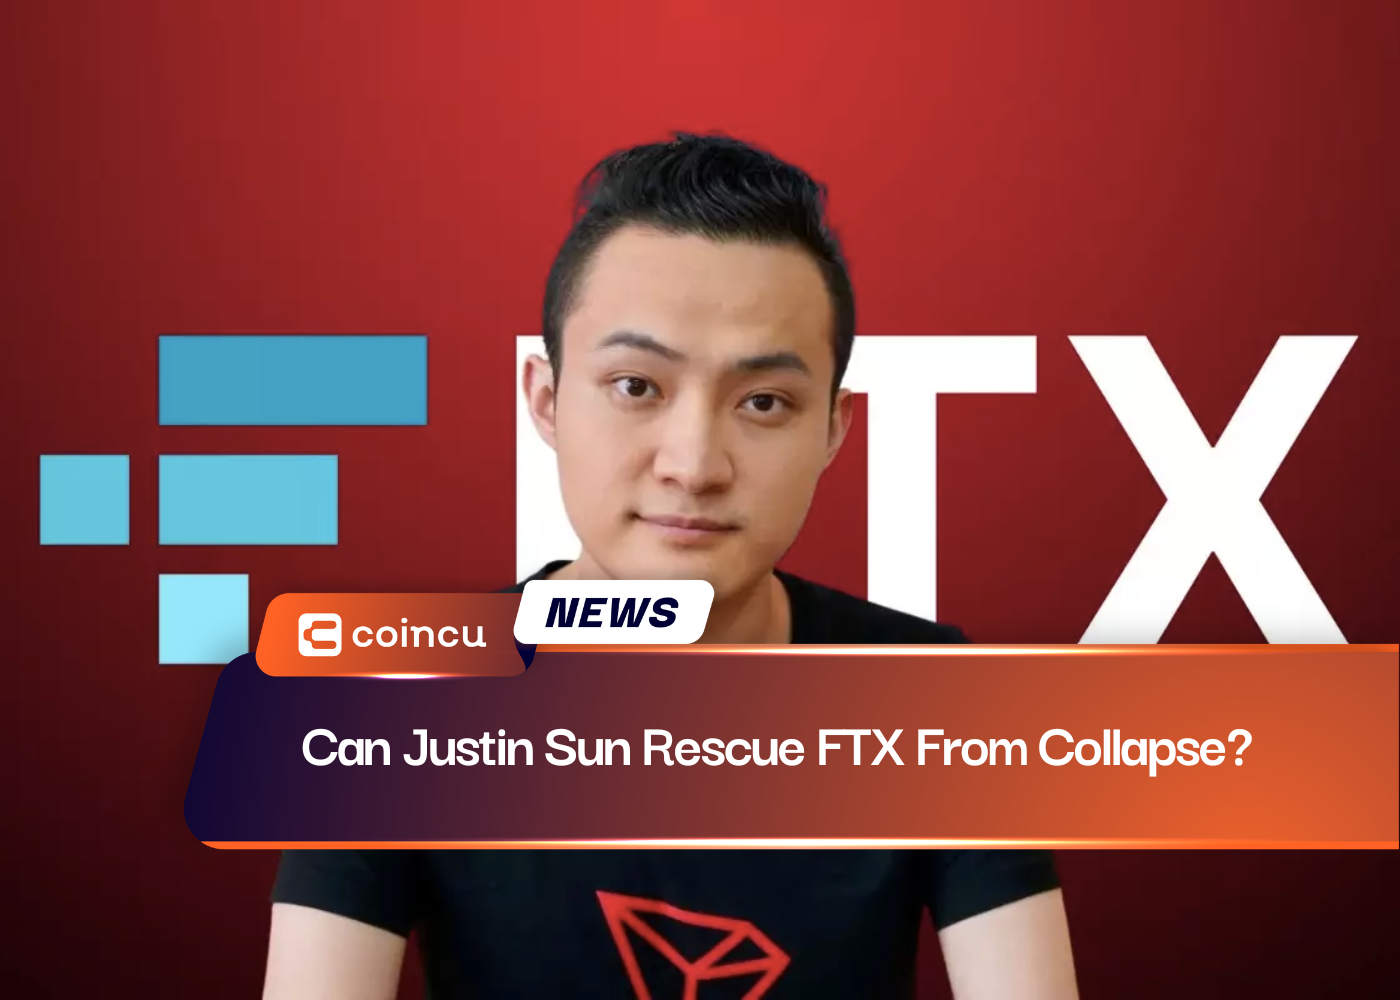 Can Justin Sun Rescue FTX From Collapse?